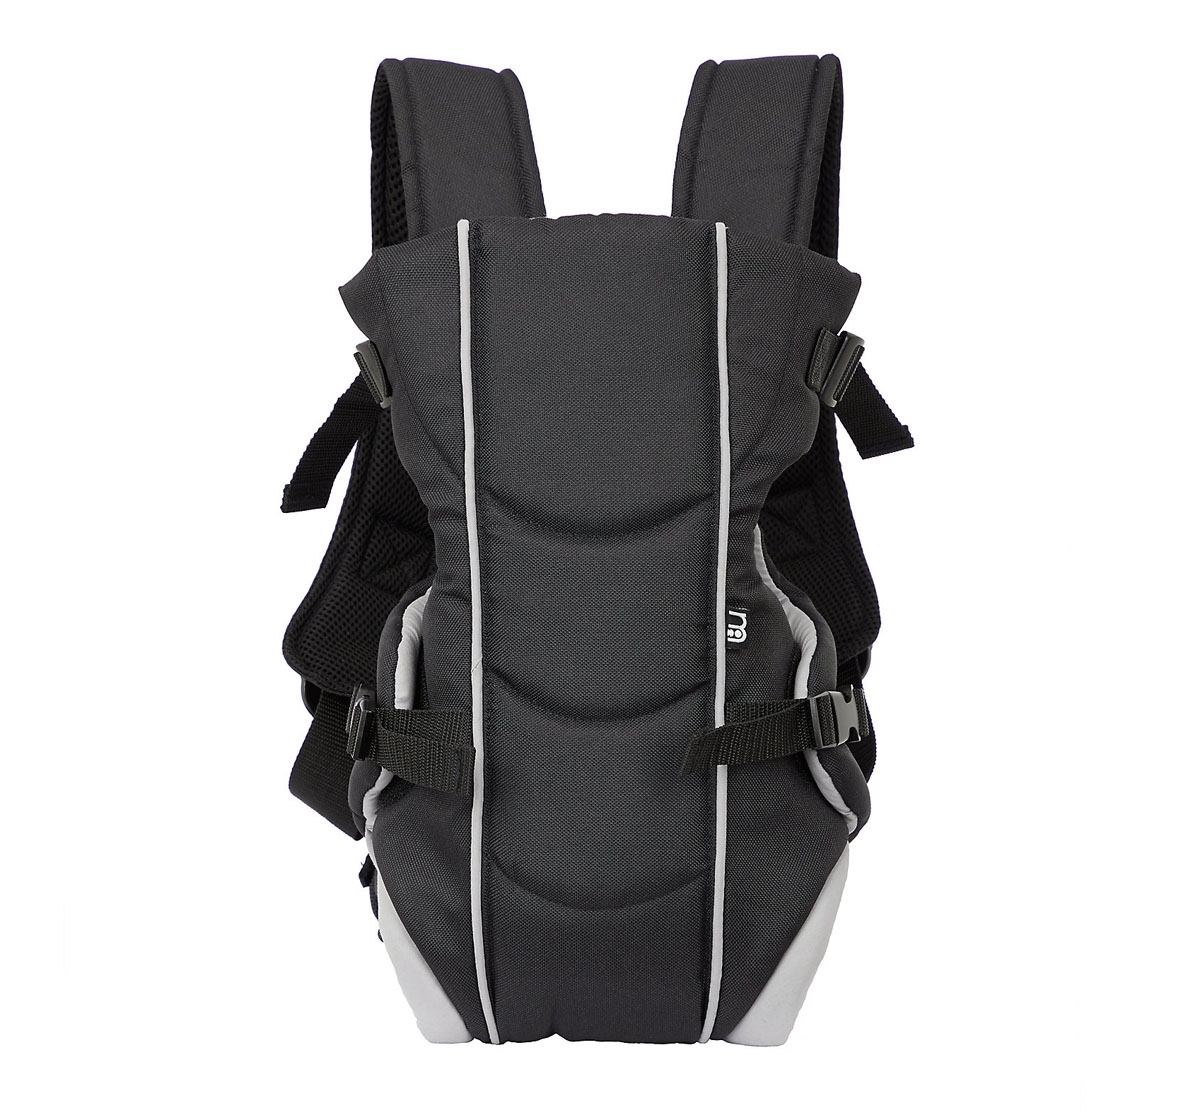 Mothercare | Mothercare Carr 3 Position Baby Carrier Black 0